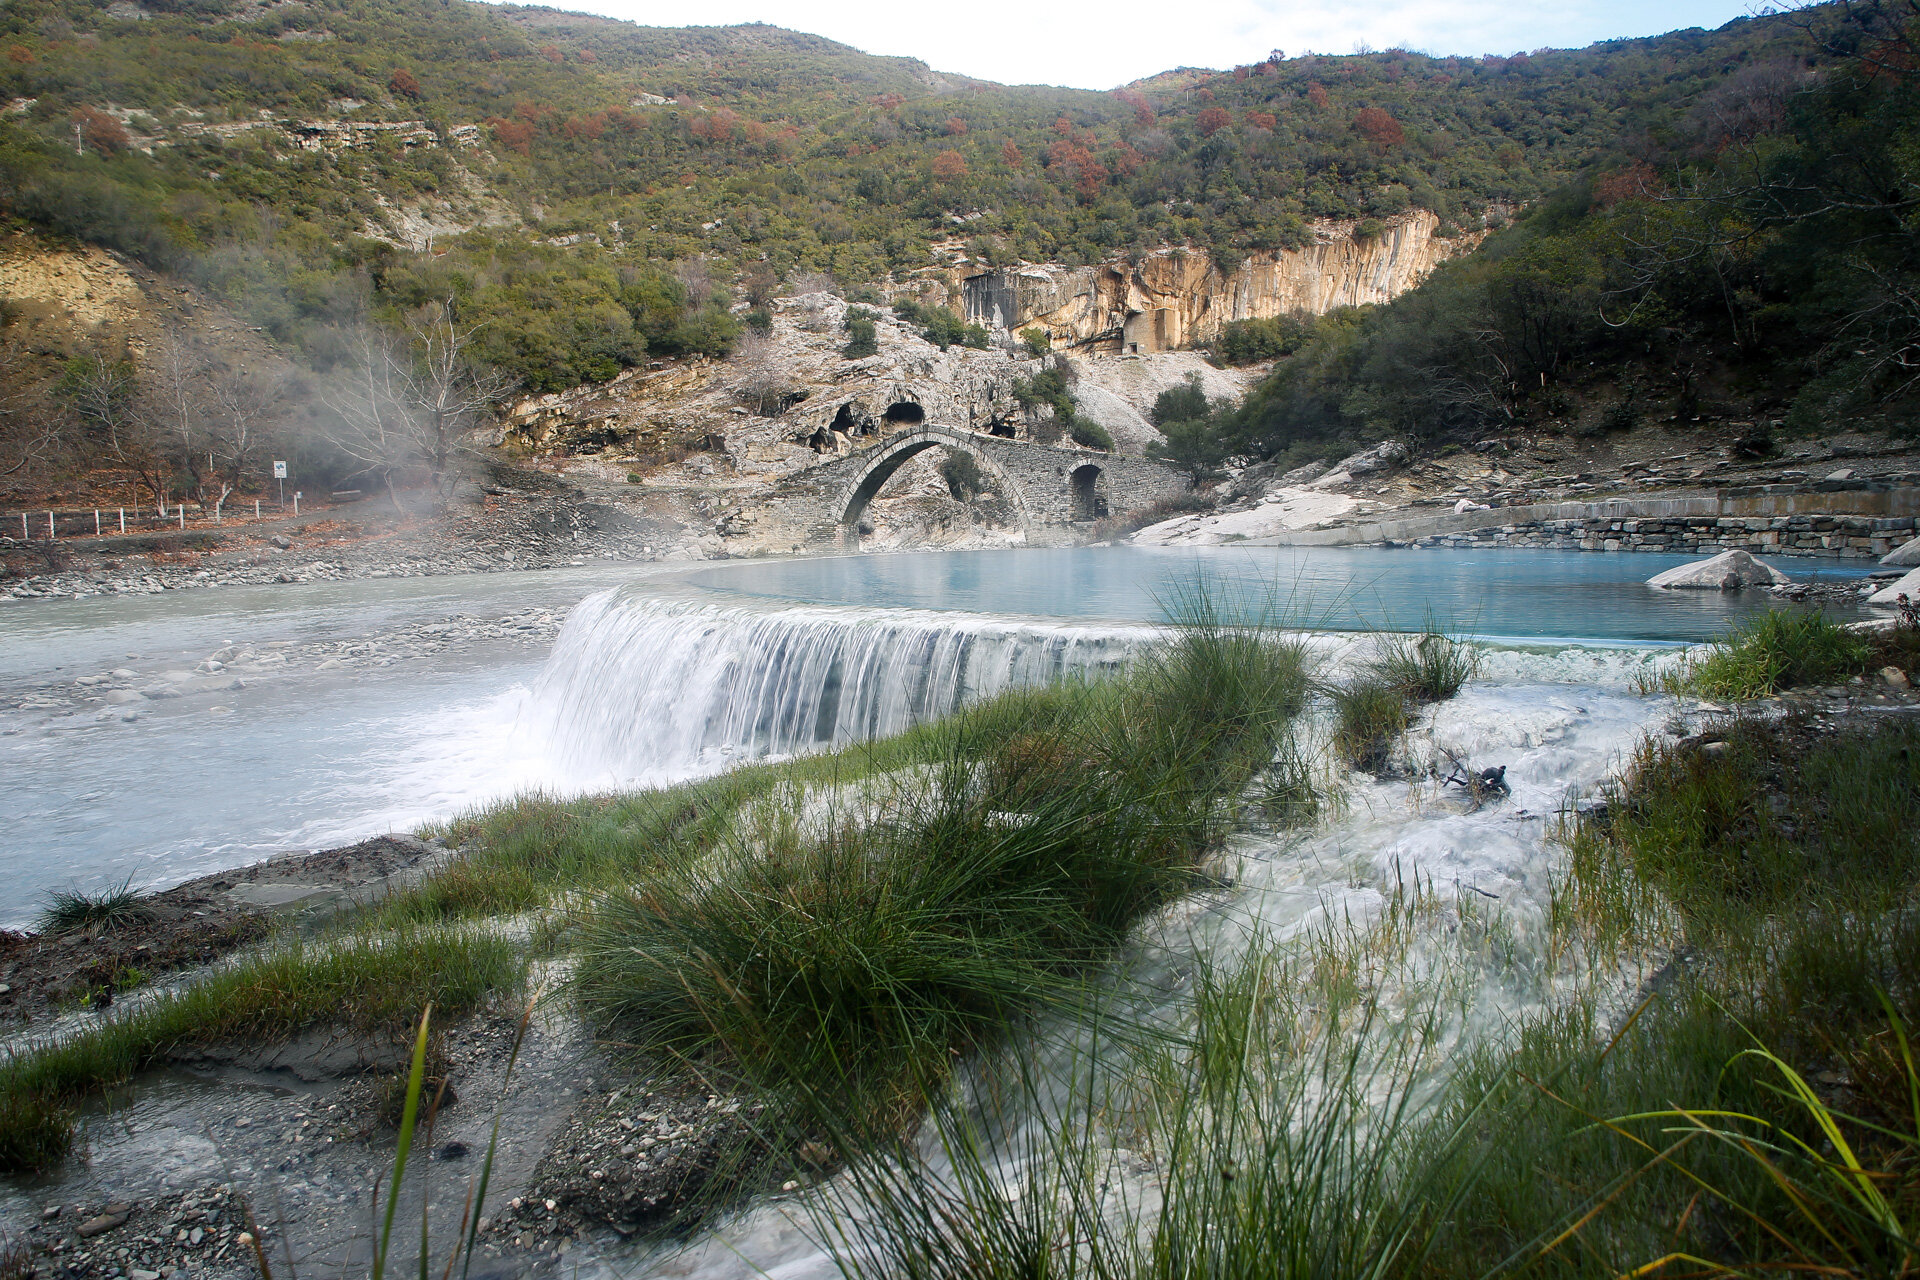 Europe's Best Free Natural Wild Hot Springs Thermal Baths - Llixhat e Benjes in Permet, Albania